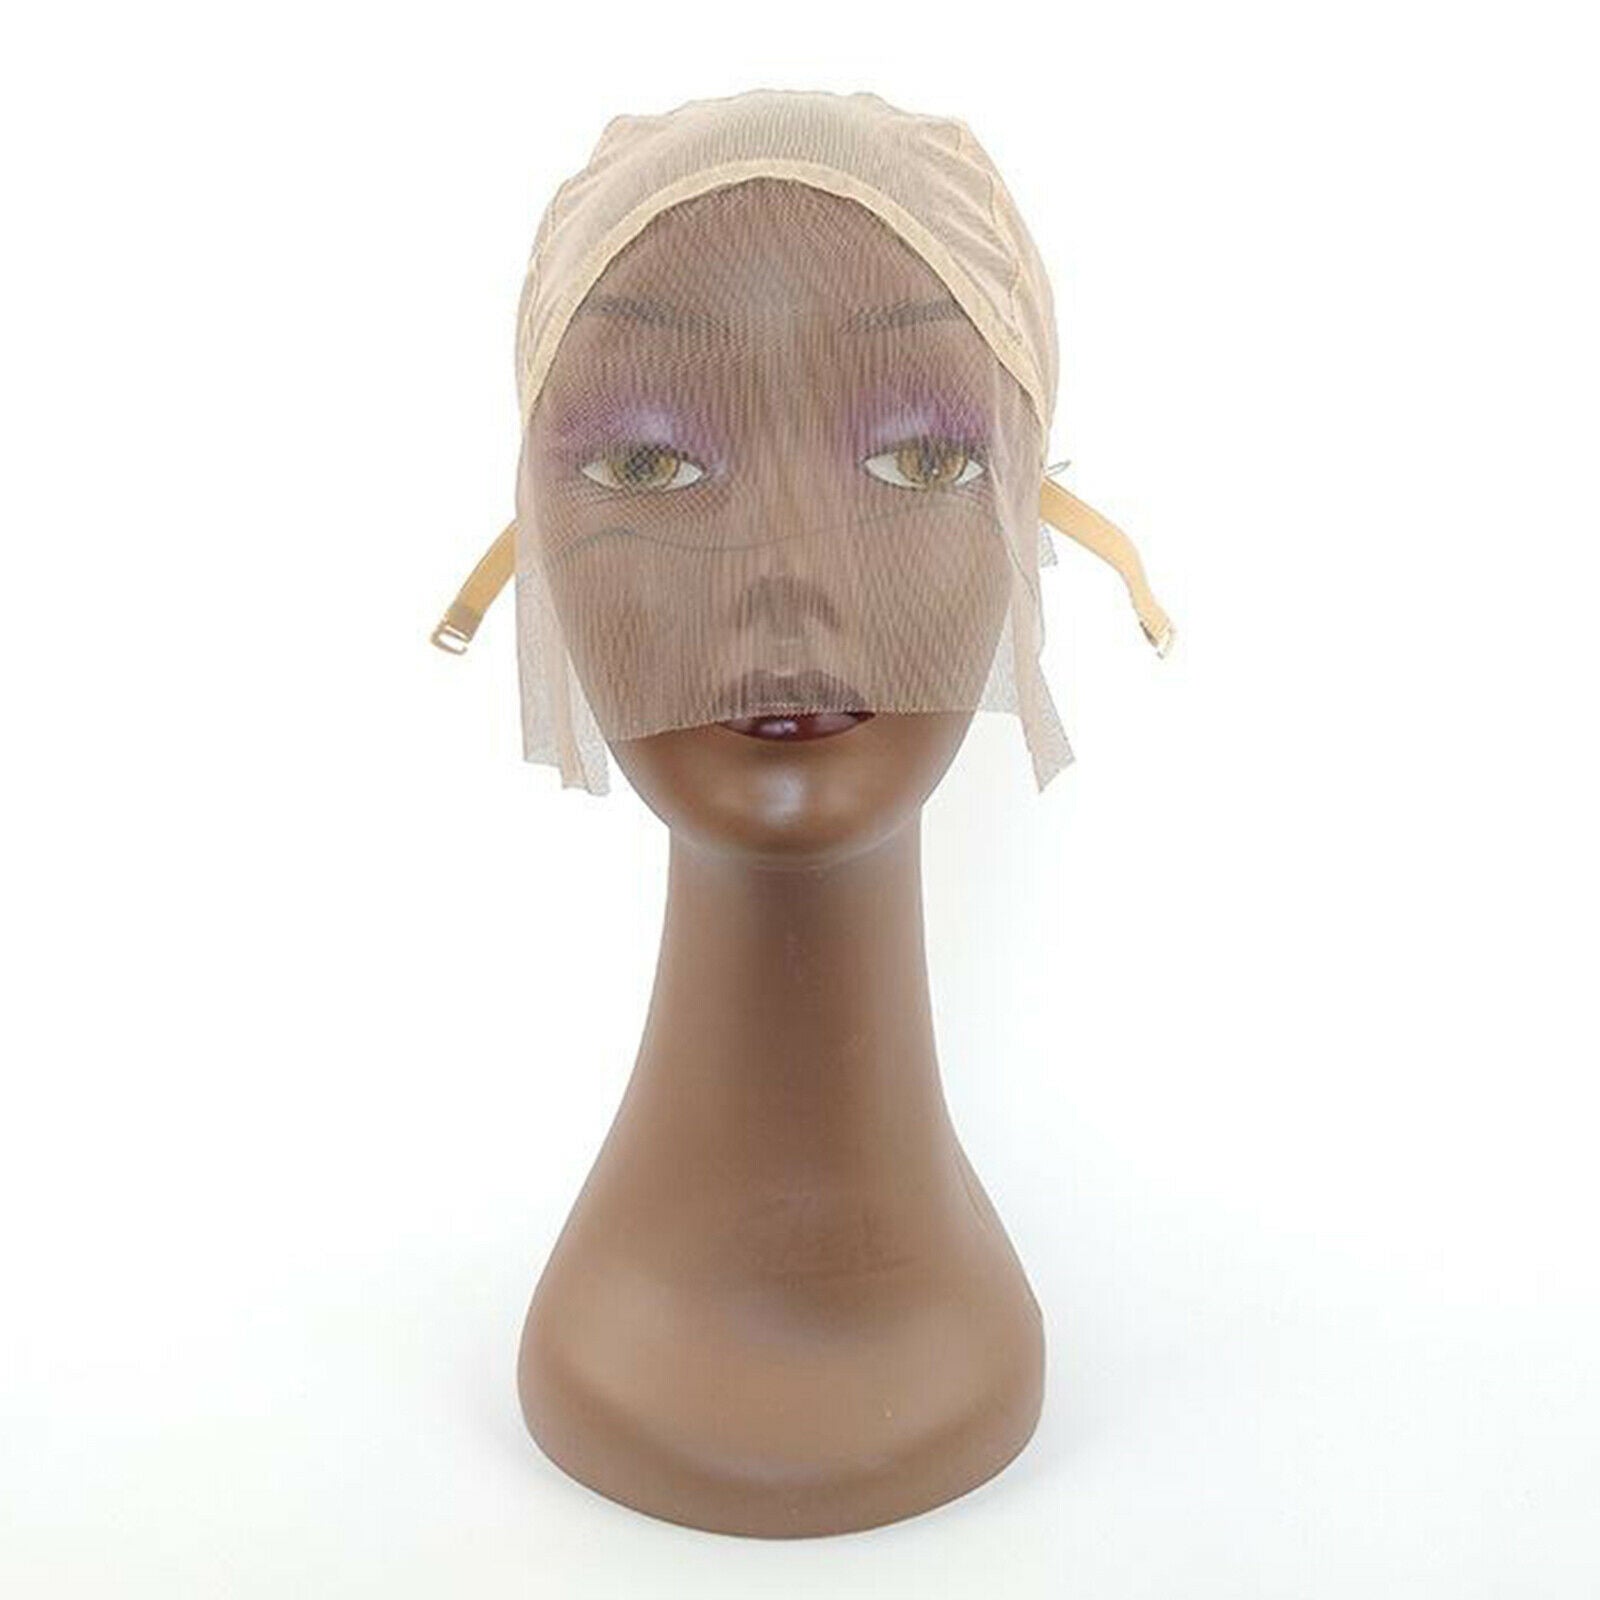 Lace Wig   with Adjustable Straps for Making Wigs, Net   Sew Weave, Crochet